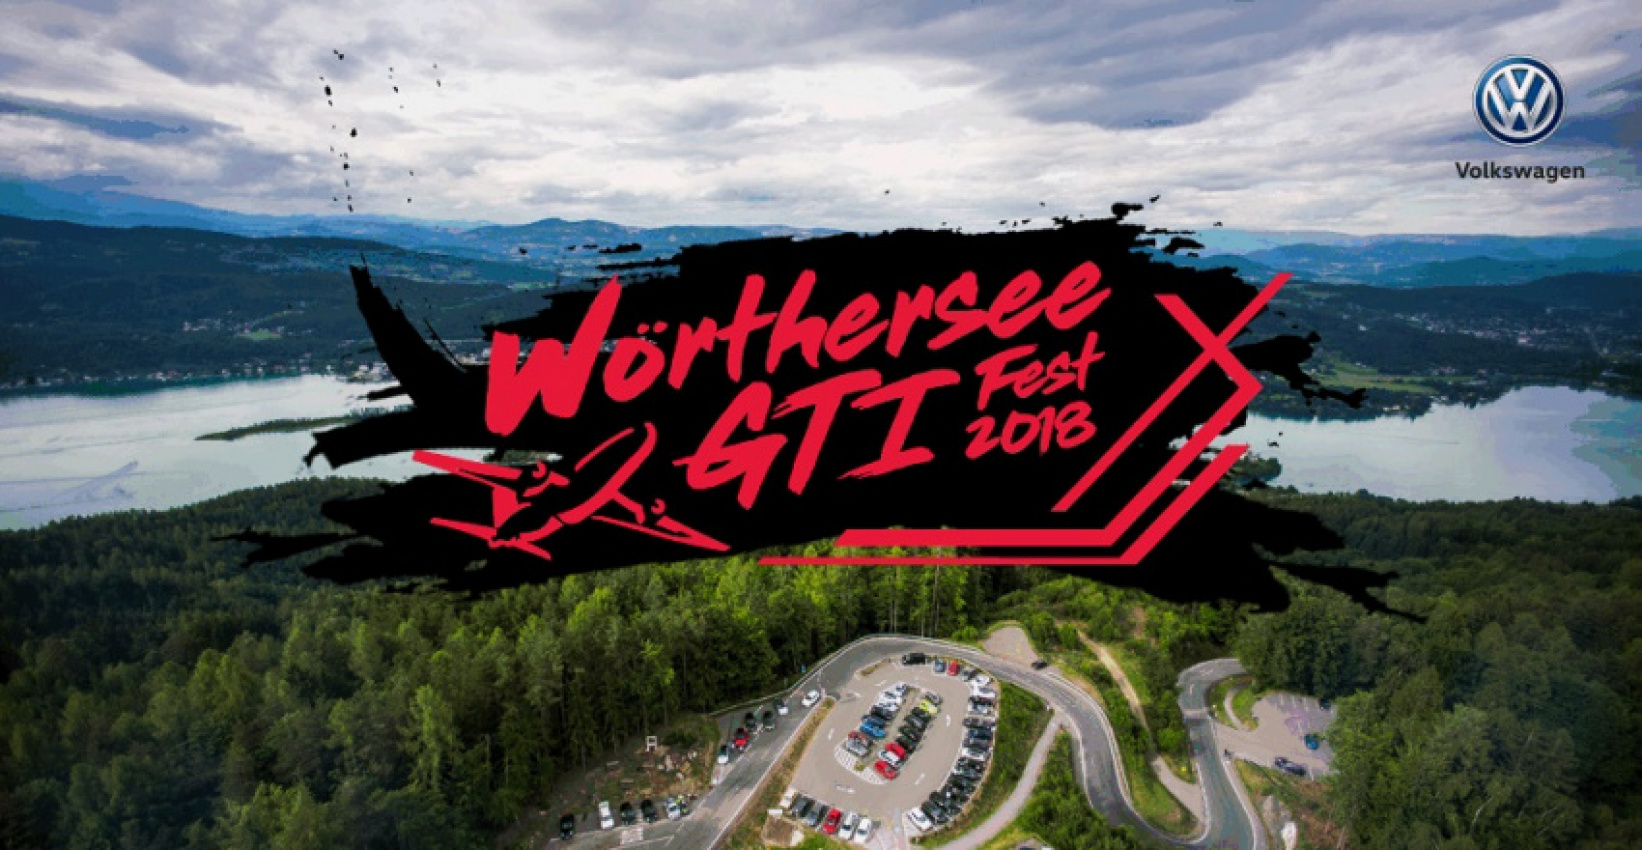 autos, car brands, cars, volkswagen, win a trip to the volkswagen gathering at wörthersee as it is worth a see